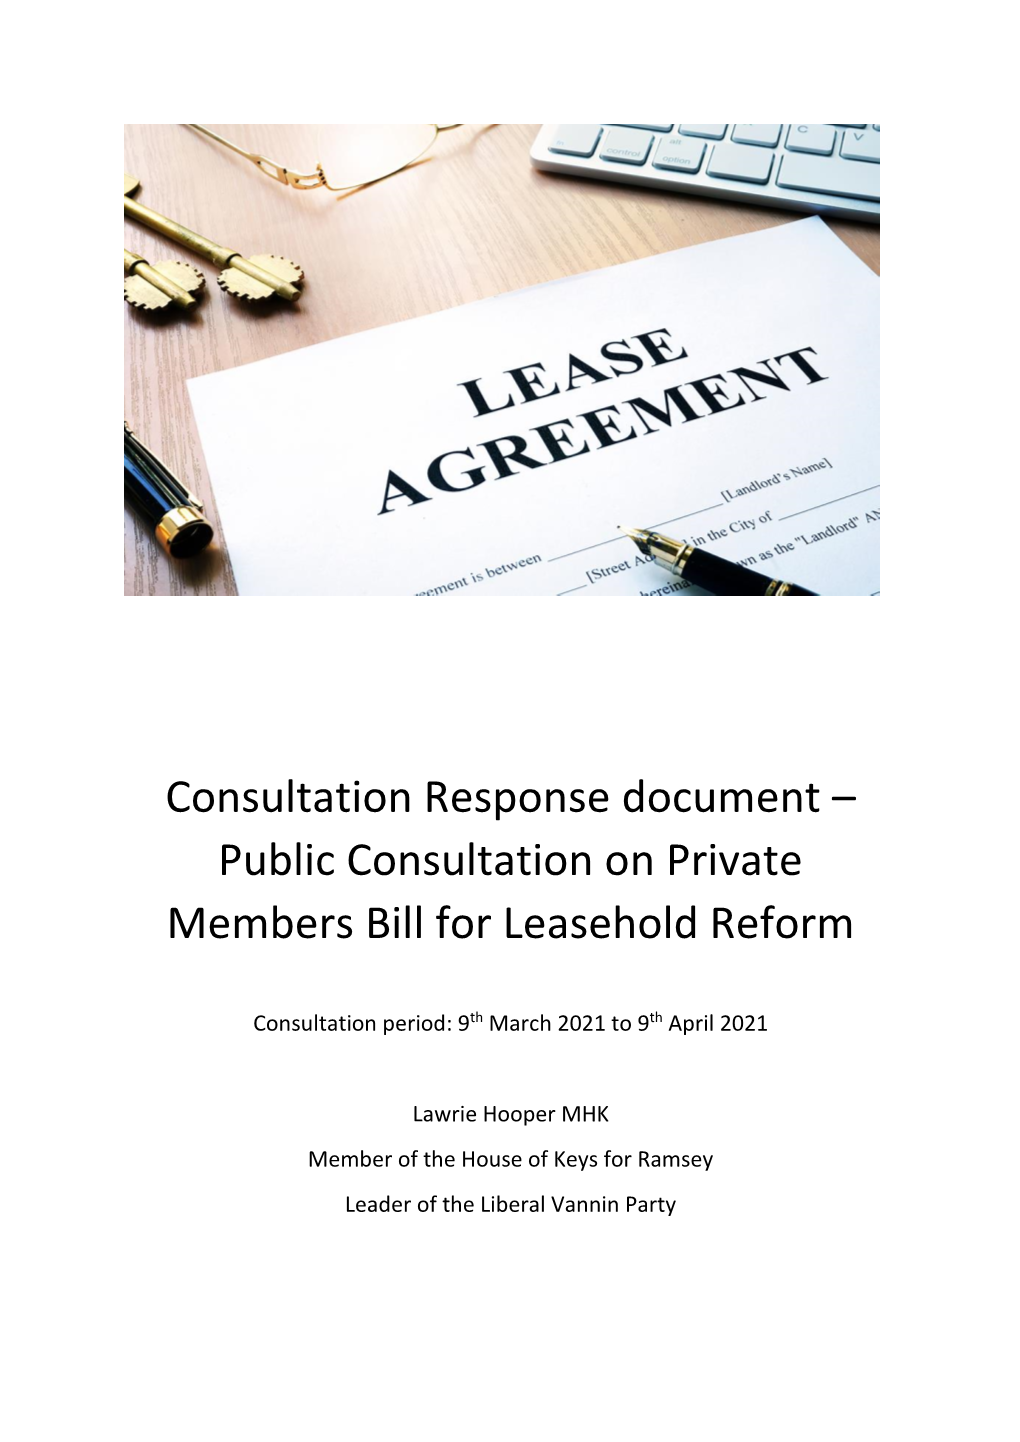 Consultation Response Document – Public Consultation on Private Members Bill for Leasehold Reform